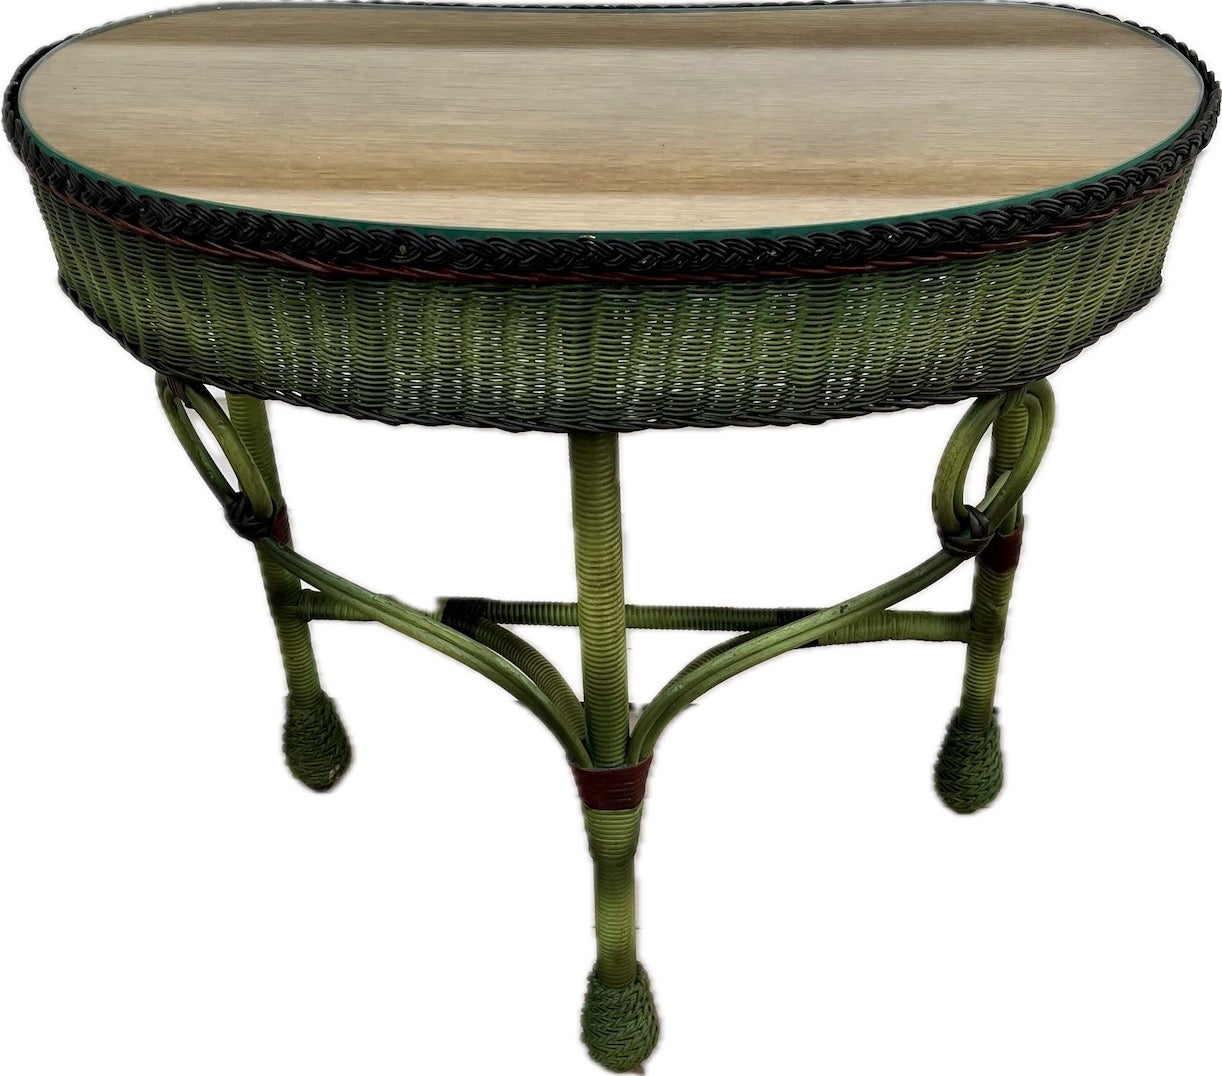 Wicker A pair of Kidney Shaped Side Tables in French Green with Quarter Sawn Oak Tops For Sale